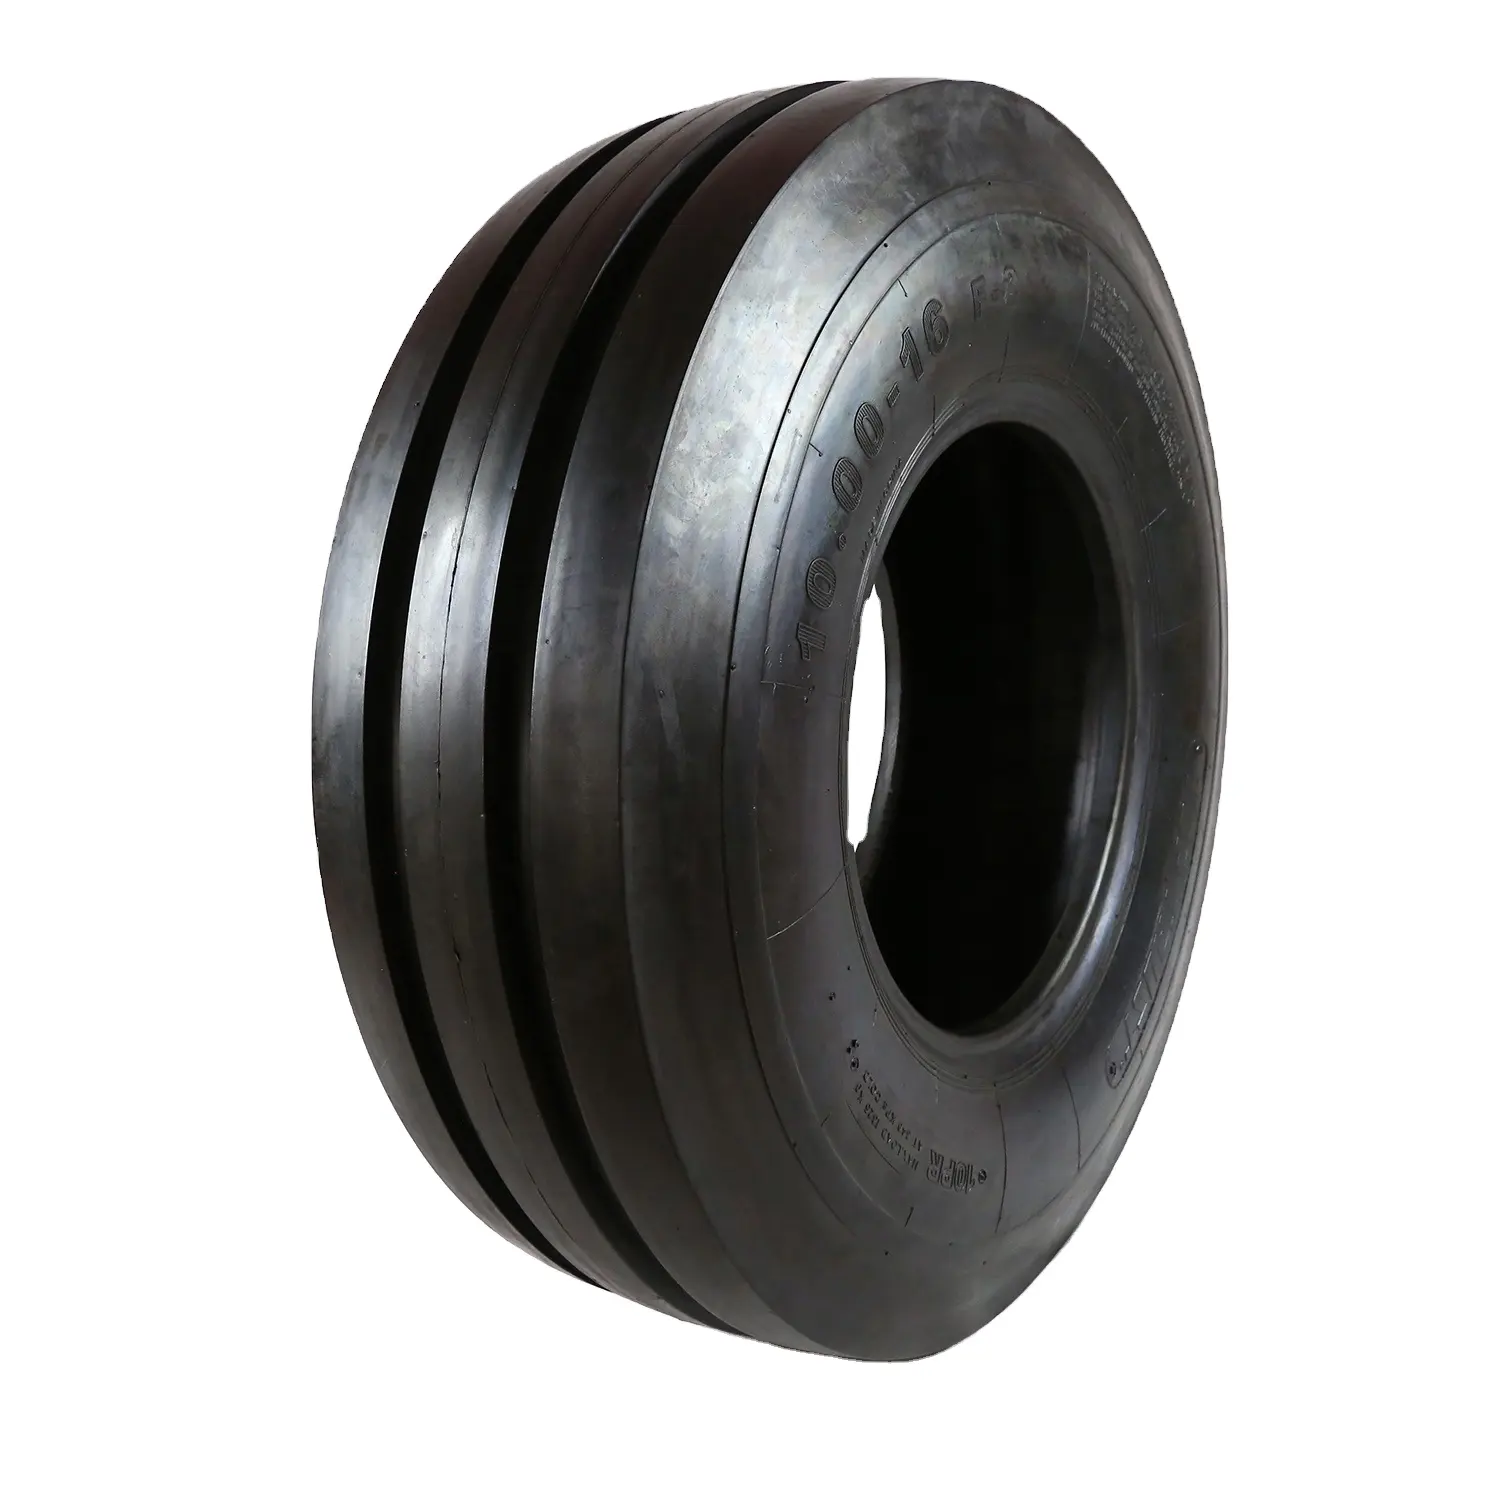 F2-2 7.50-18 Tire, Agriculture Tyres for Tractor, Made in China Factory of All Win and Top Trust Brand.